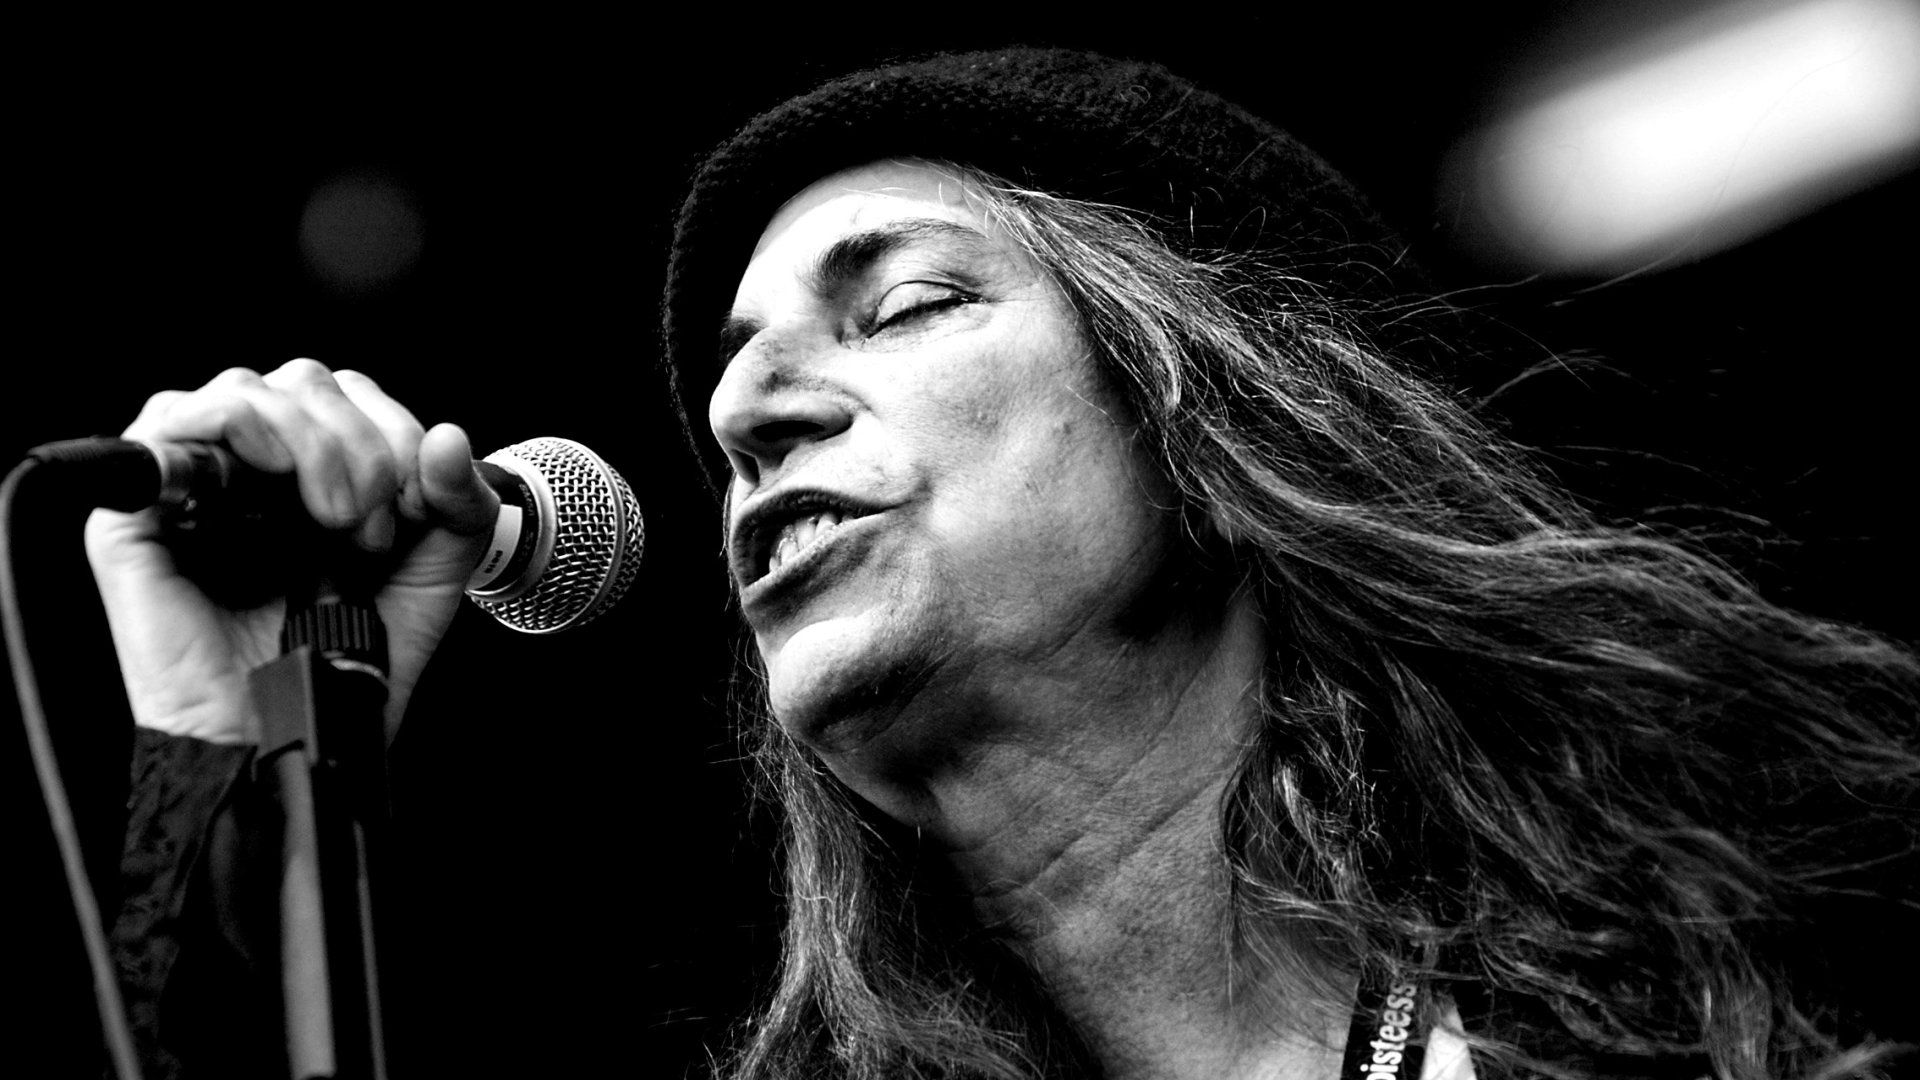 Download Wallpaper 1920x1080 patti smith, face, microphone, hair